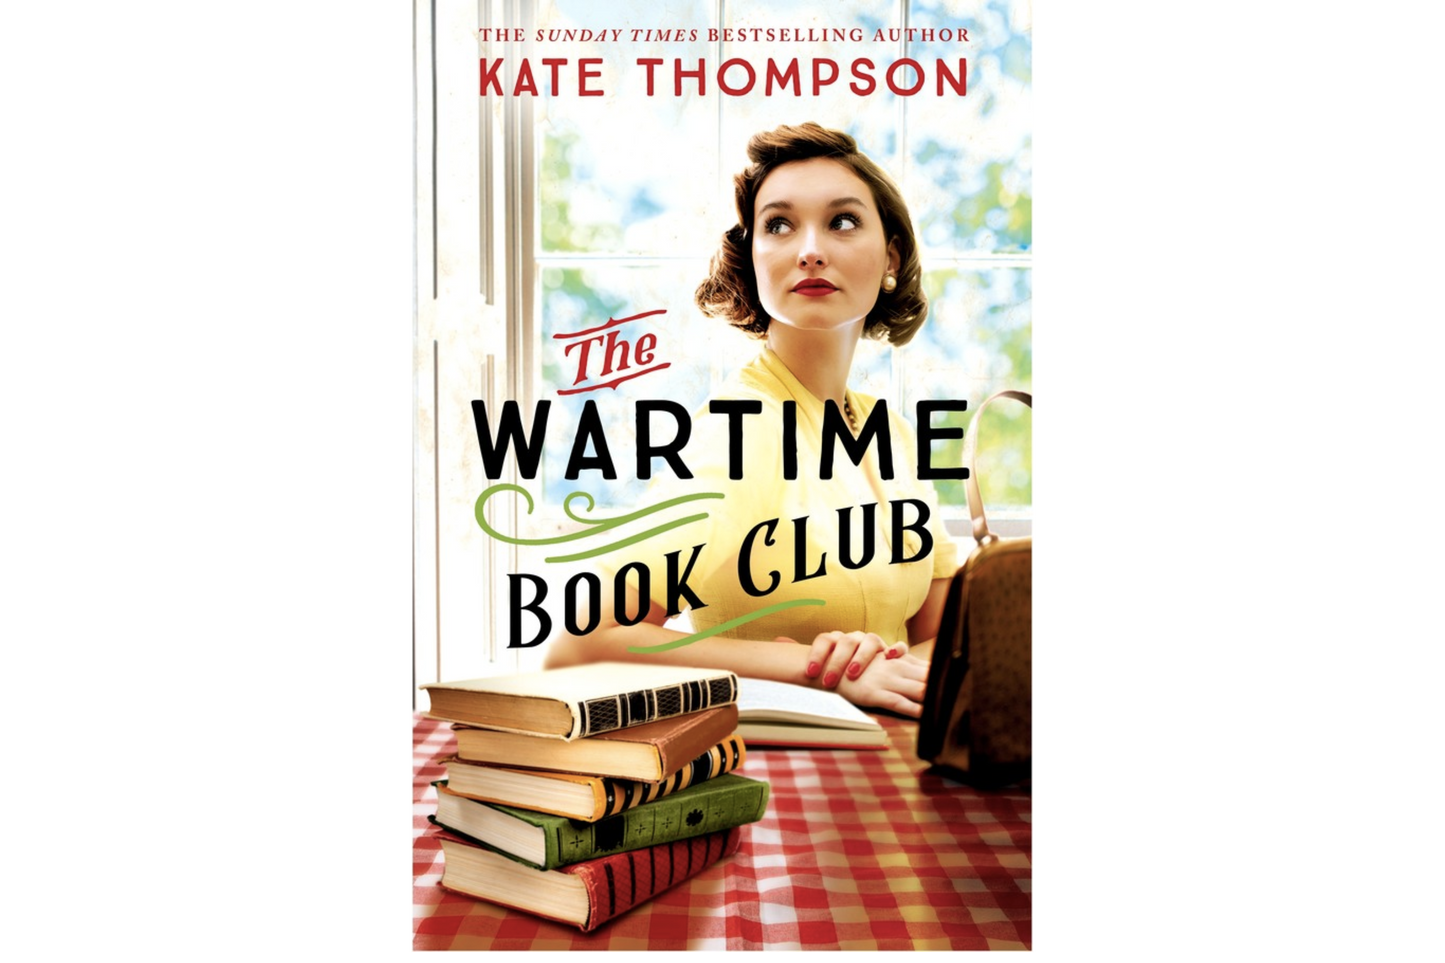 The Wartime Bookclub (Kate Thompson)